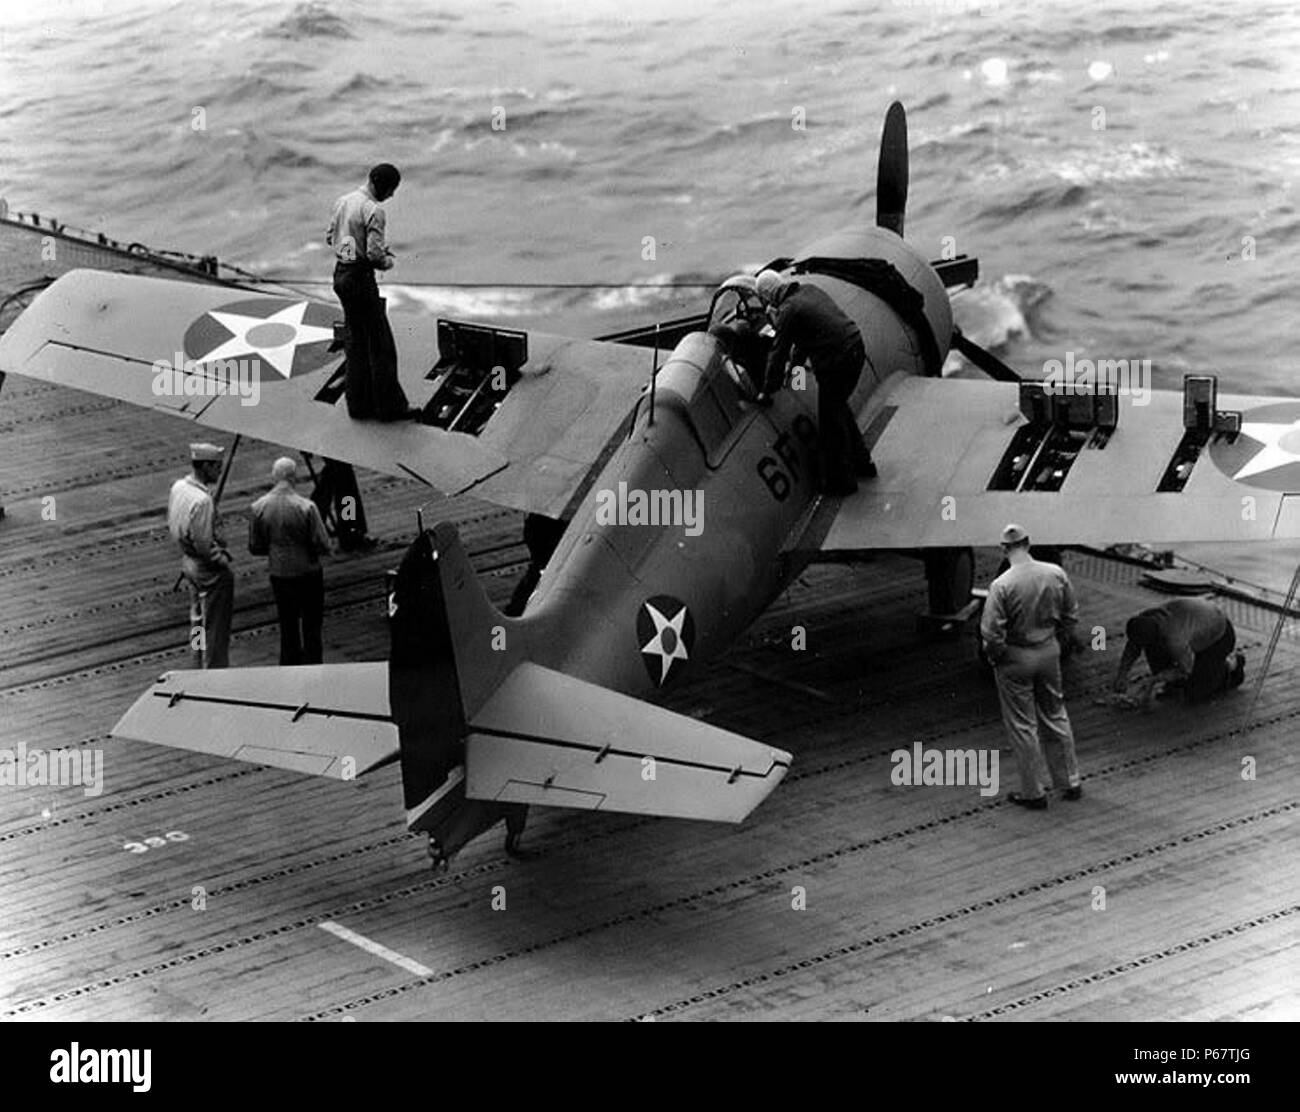 American World War Two fighter aircraft being maintained and repaired on board  a US aircraft carrier. Stock Photo